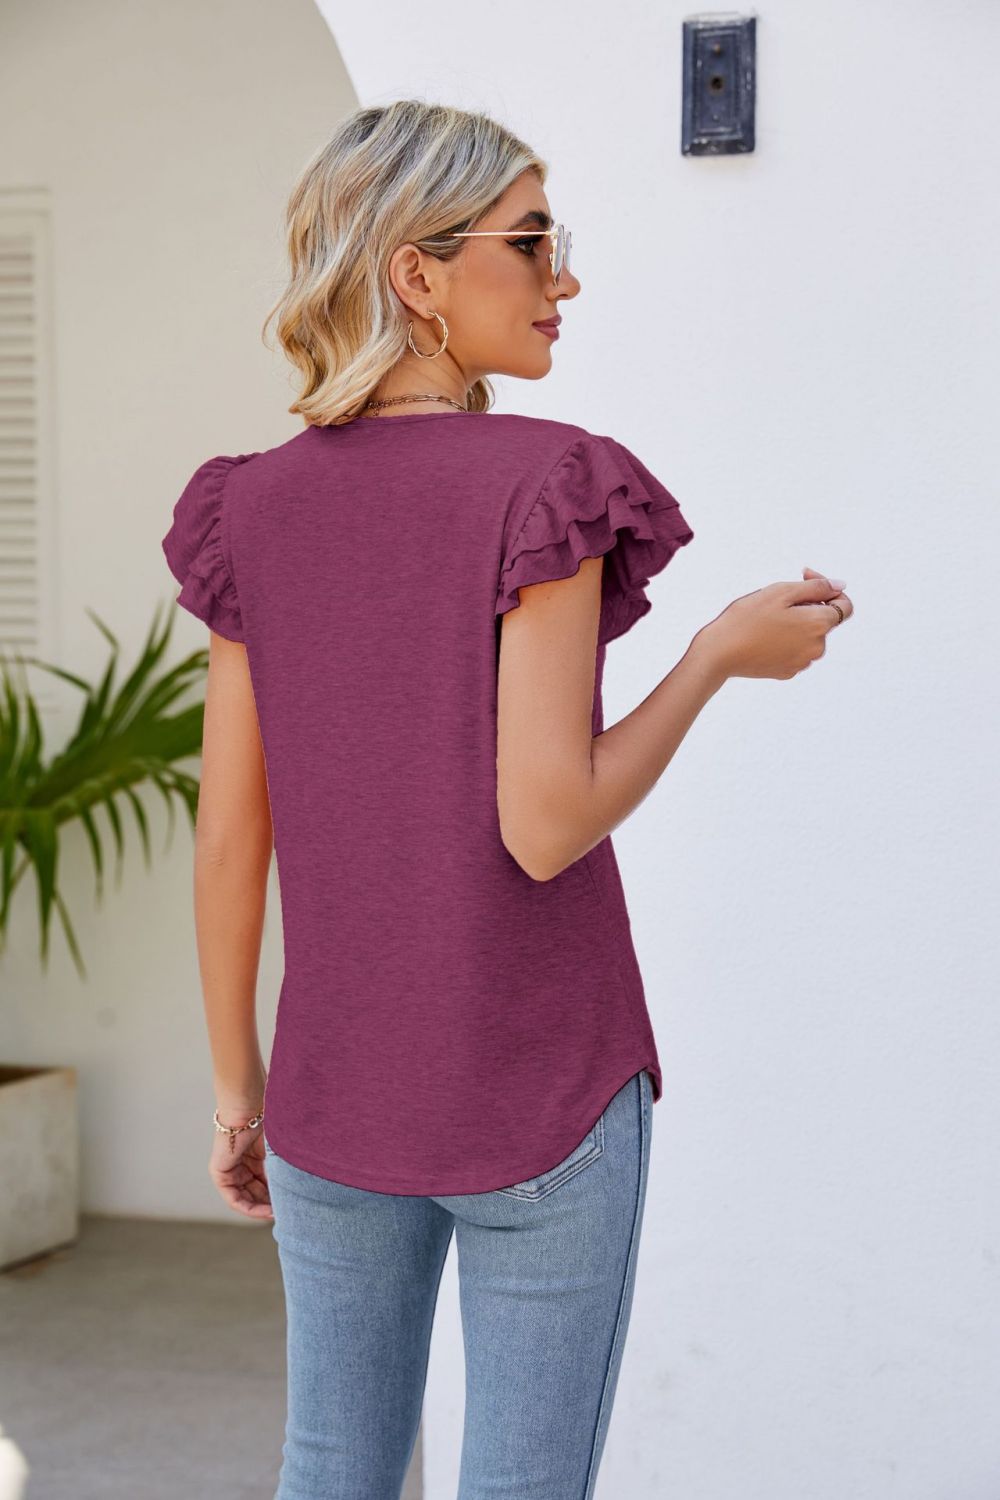 Adorably Yours Smocked Flutter Sleeve Top, SM-2X, SIX COLORS!